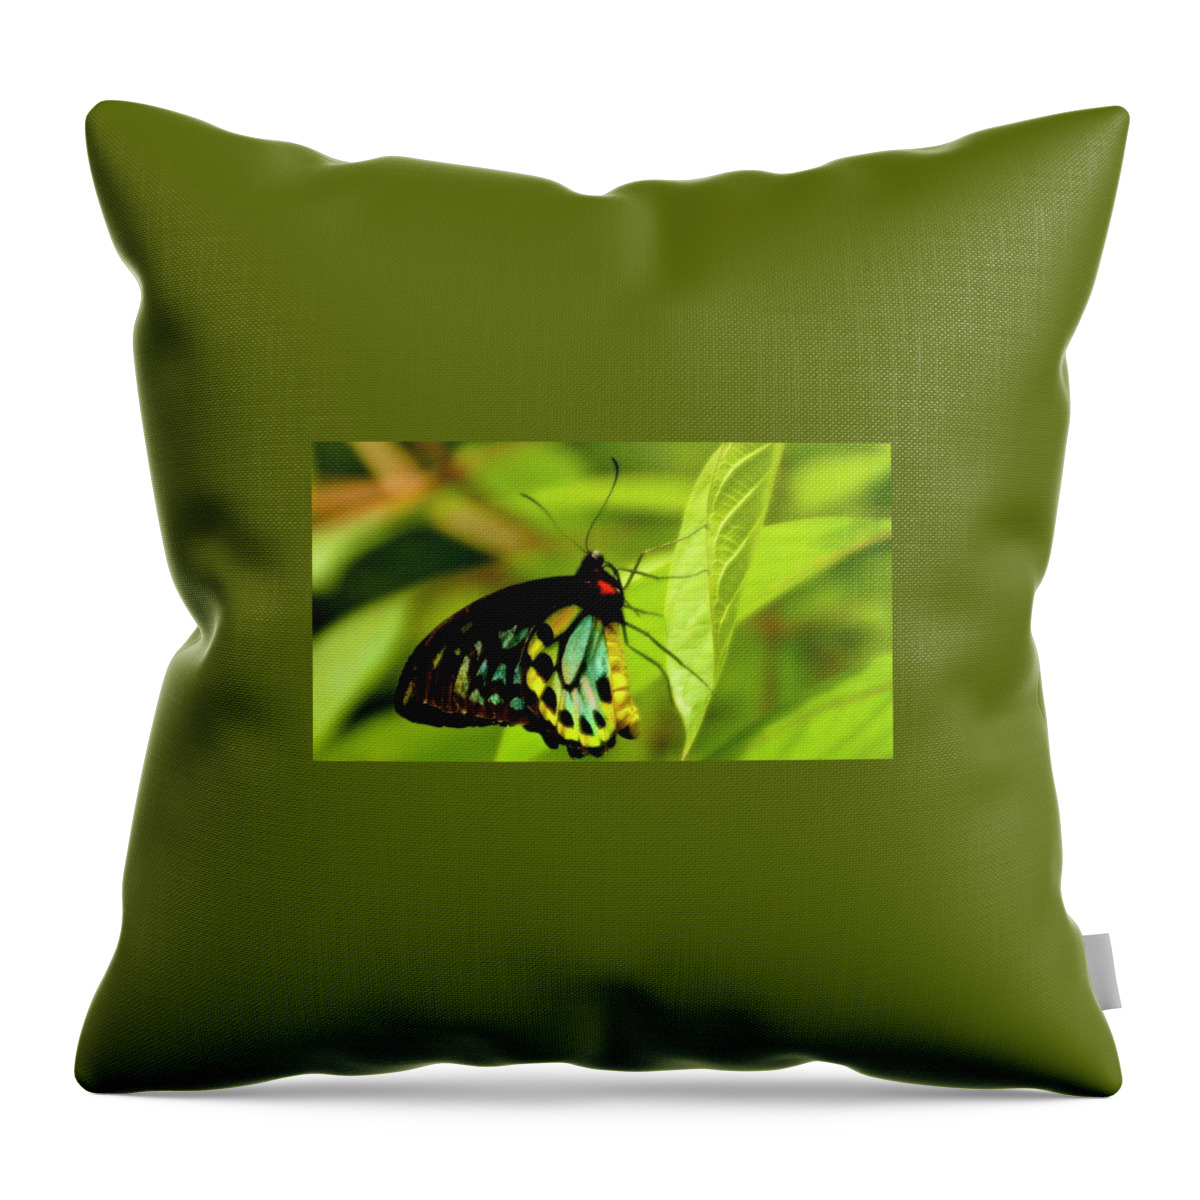  Throw Pillow featuring the photograph Multi Colored Buttrfly by Bill Jordan